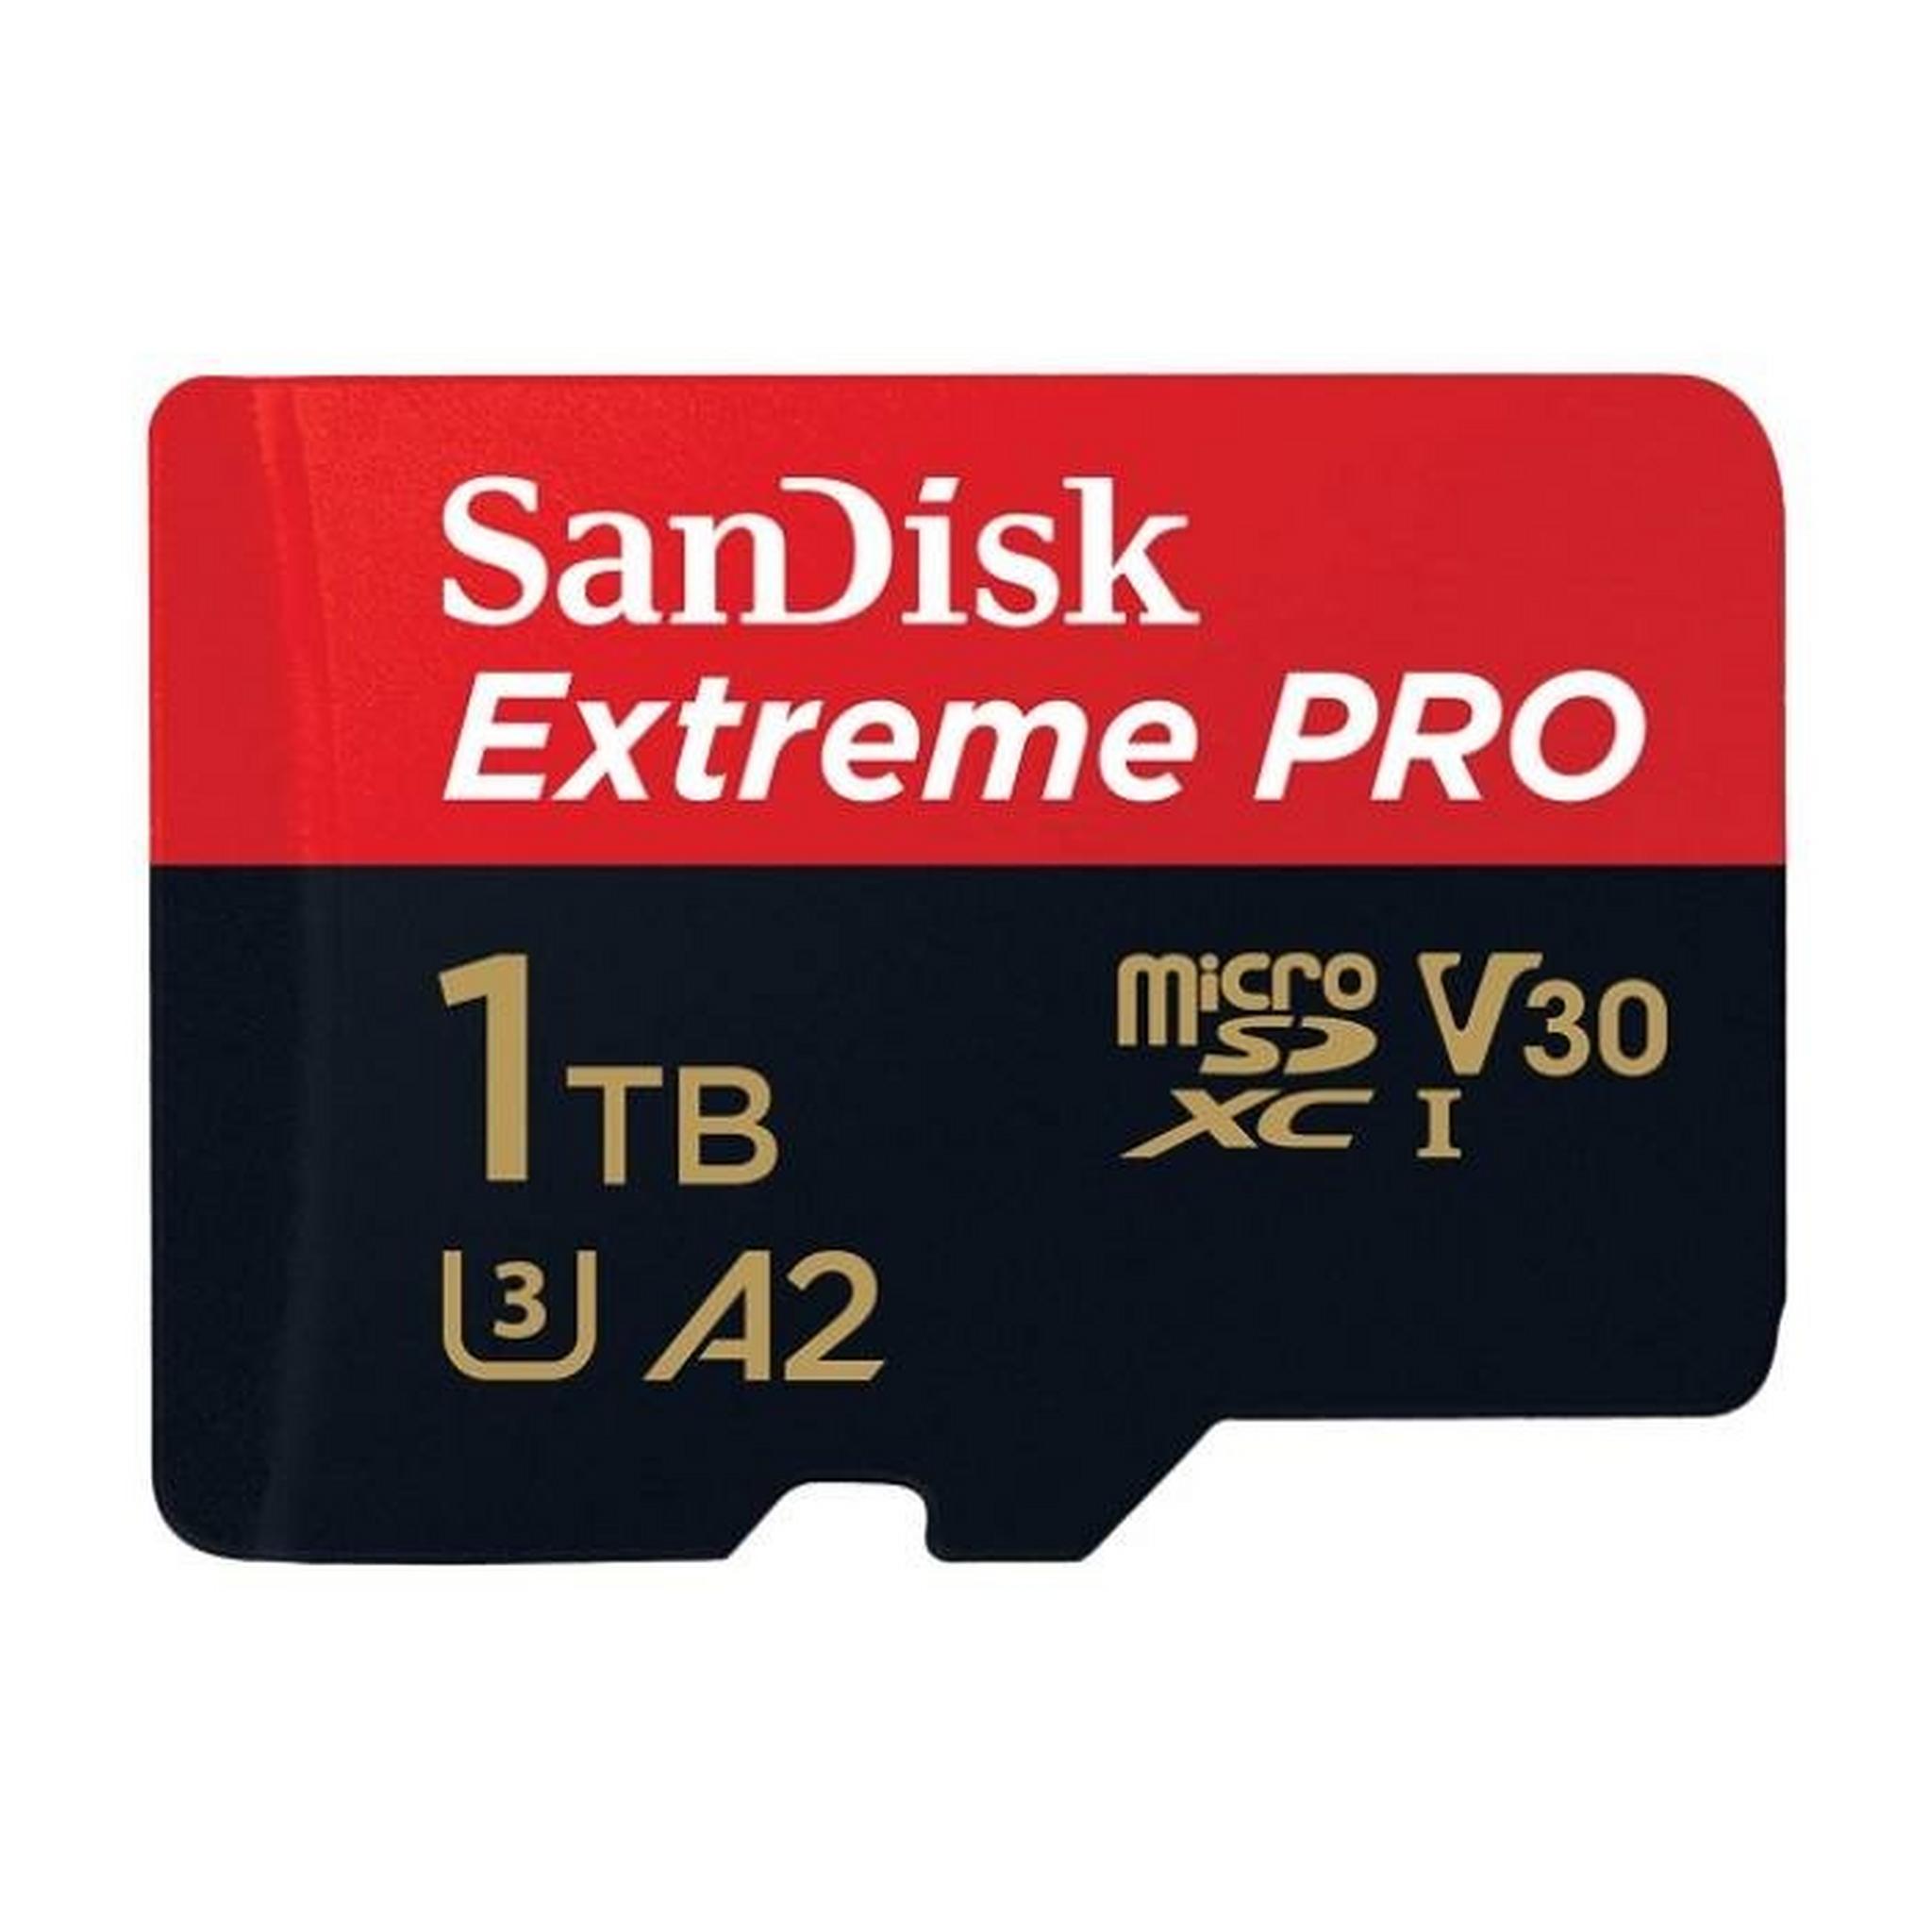 Sandisk Extreme Pro Micro SDXC 1TB Memory Card  (SDSQXCZ-1T00-GN6MA)